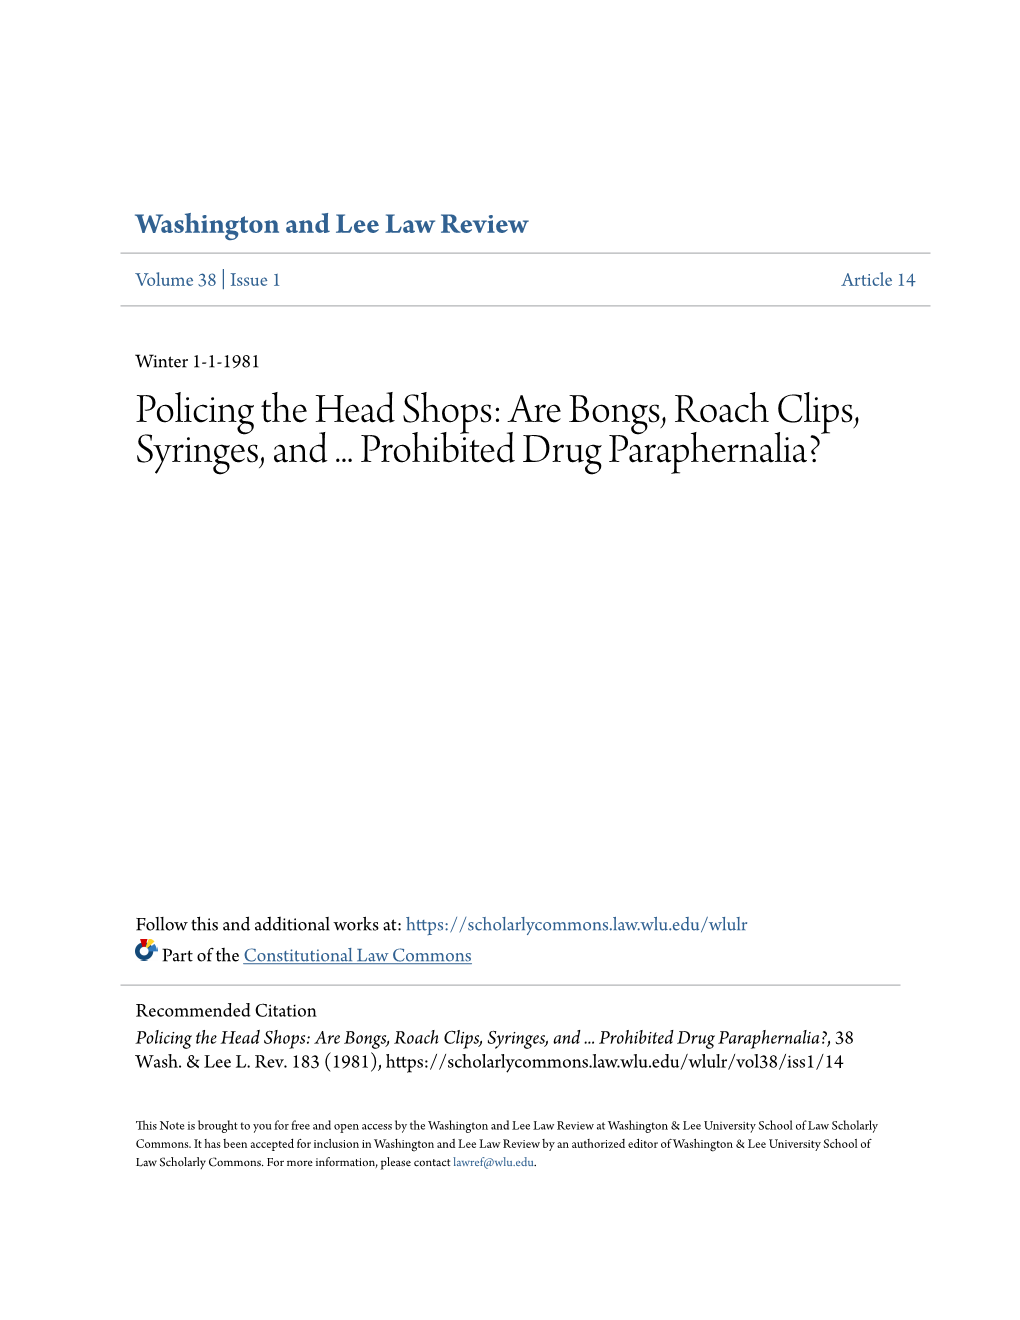 Policing the Head Shops: Are Bongs, Roach Clips, Syringes, and